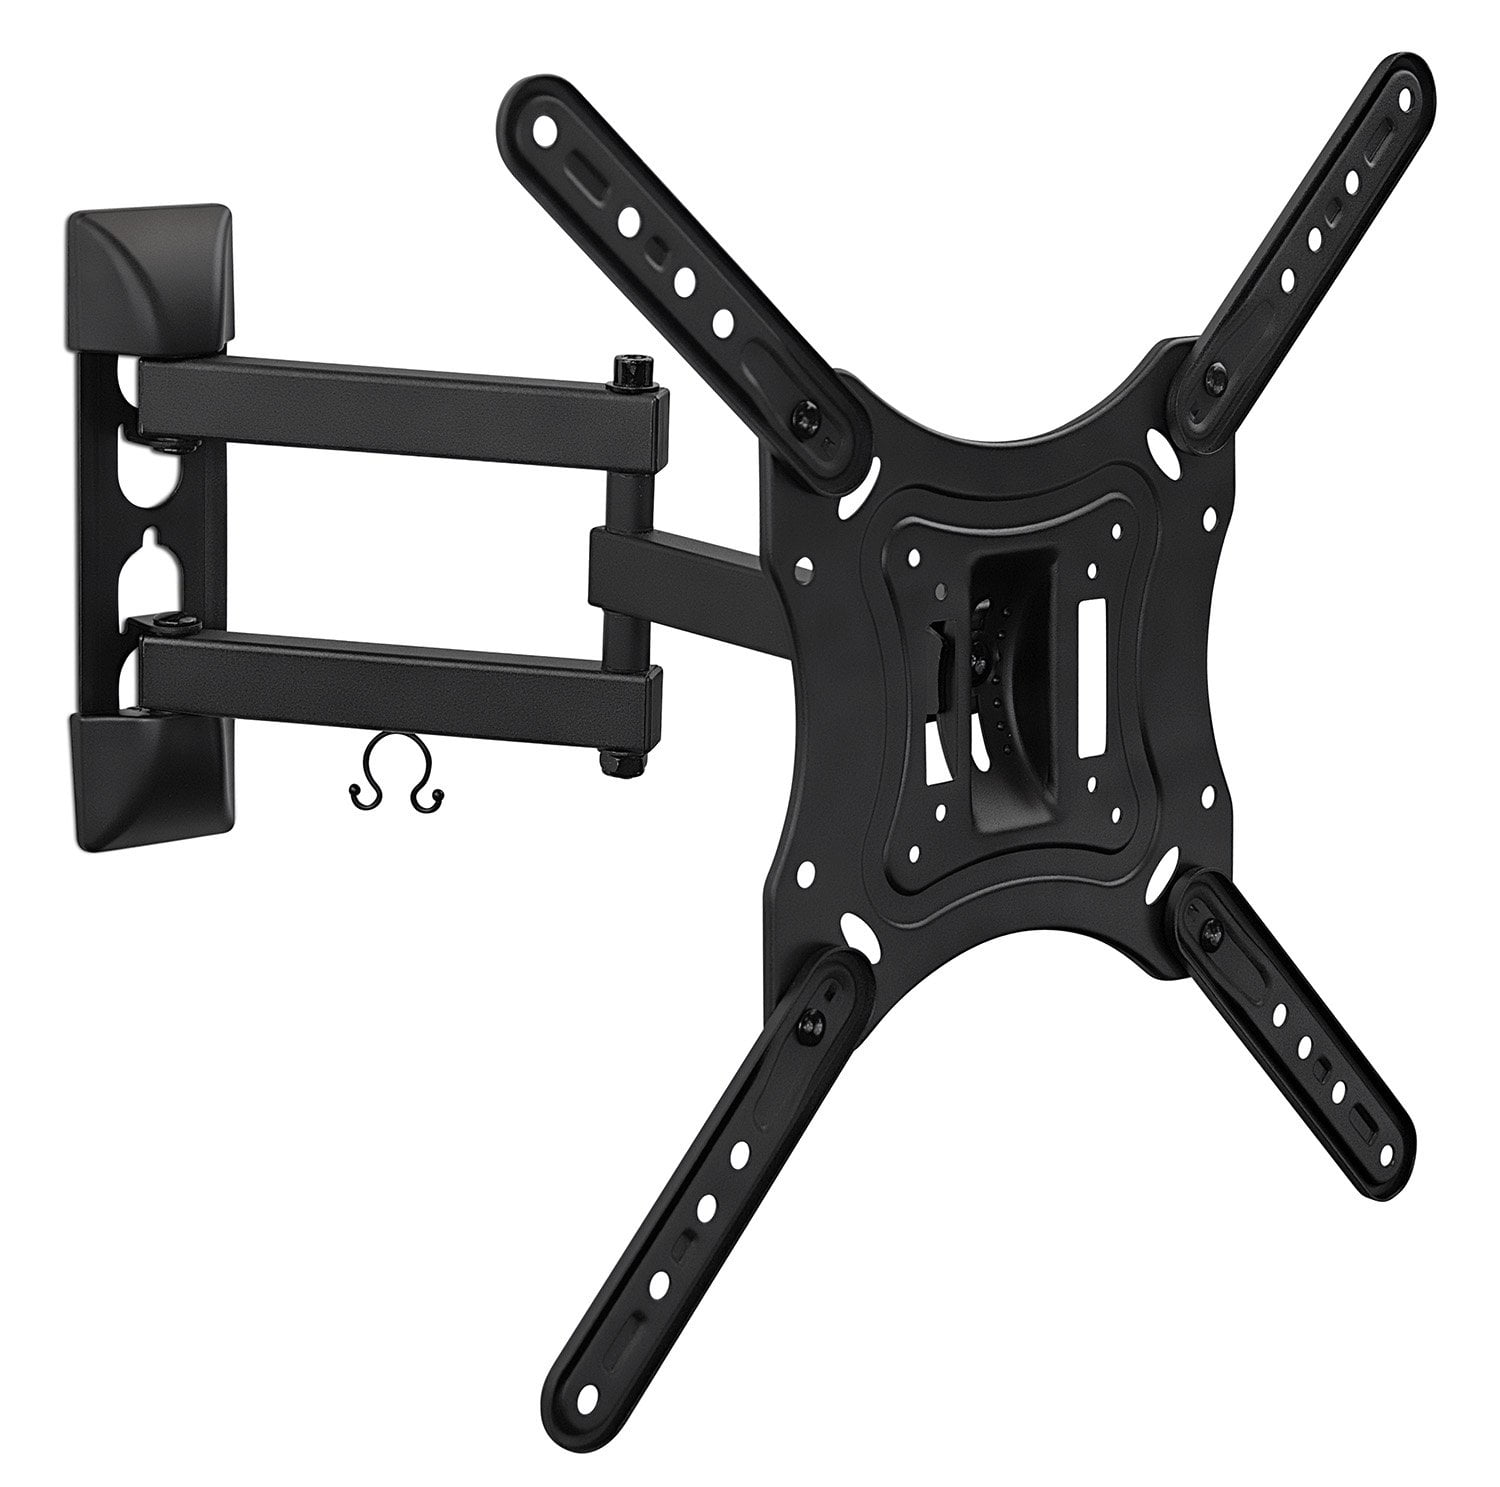 Mount-It! Articulating TV Wall Mount w/Full Motion Arm for 32-55 Inch TVs | MI-4110 | Walmart Canada